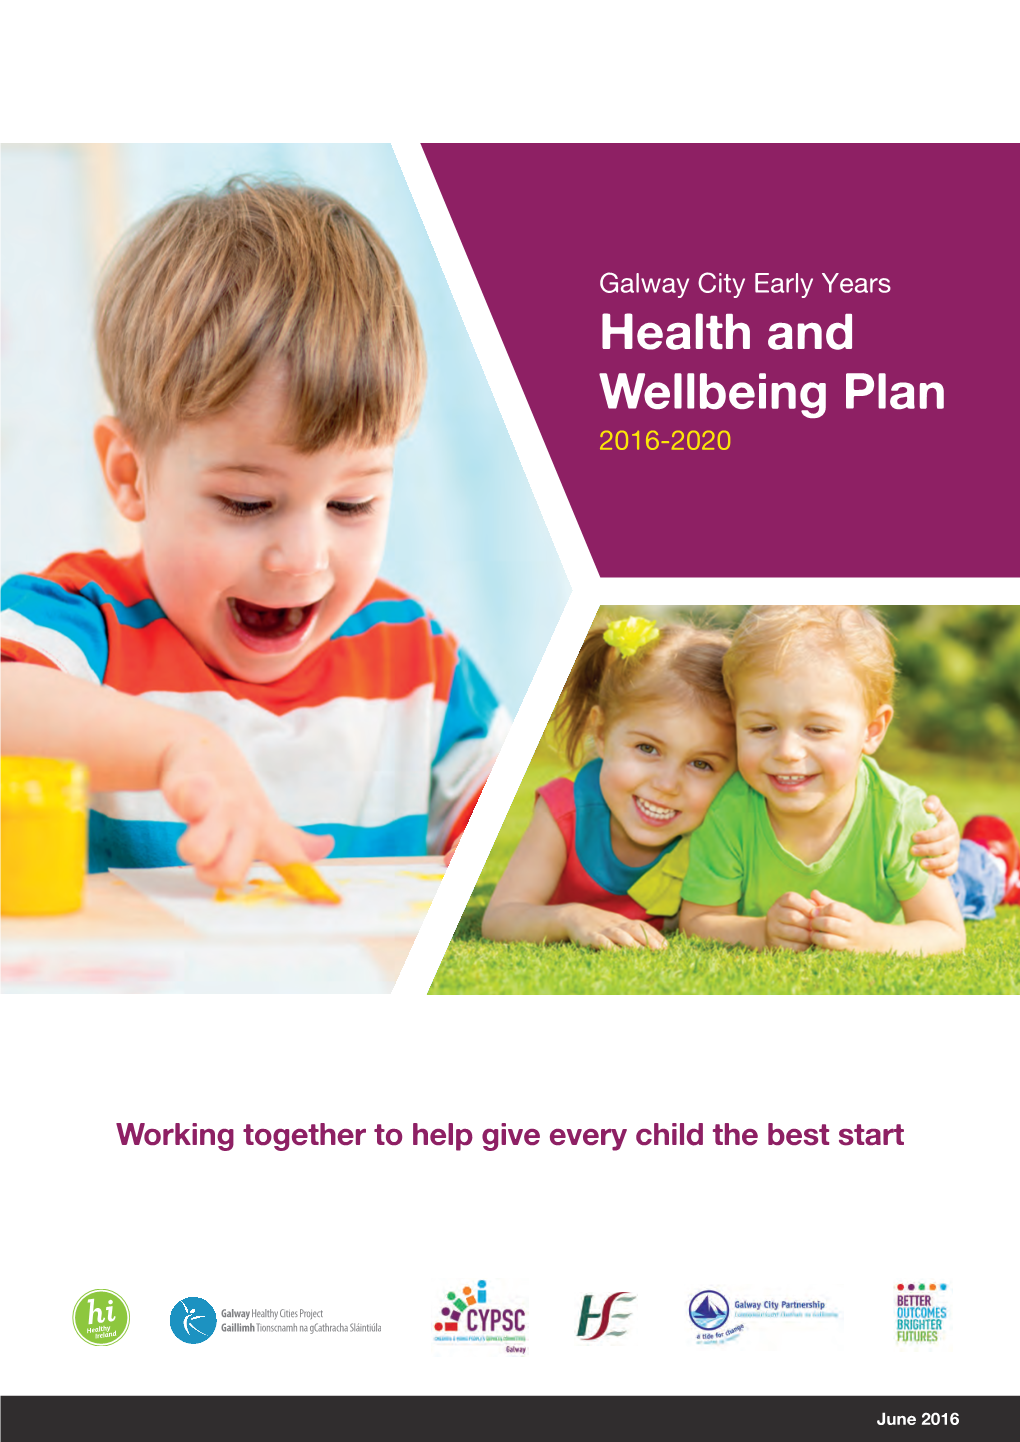 Galway City Early Years Health and Wellbeing Plan 2016-2020